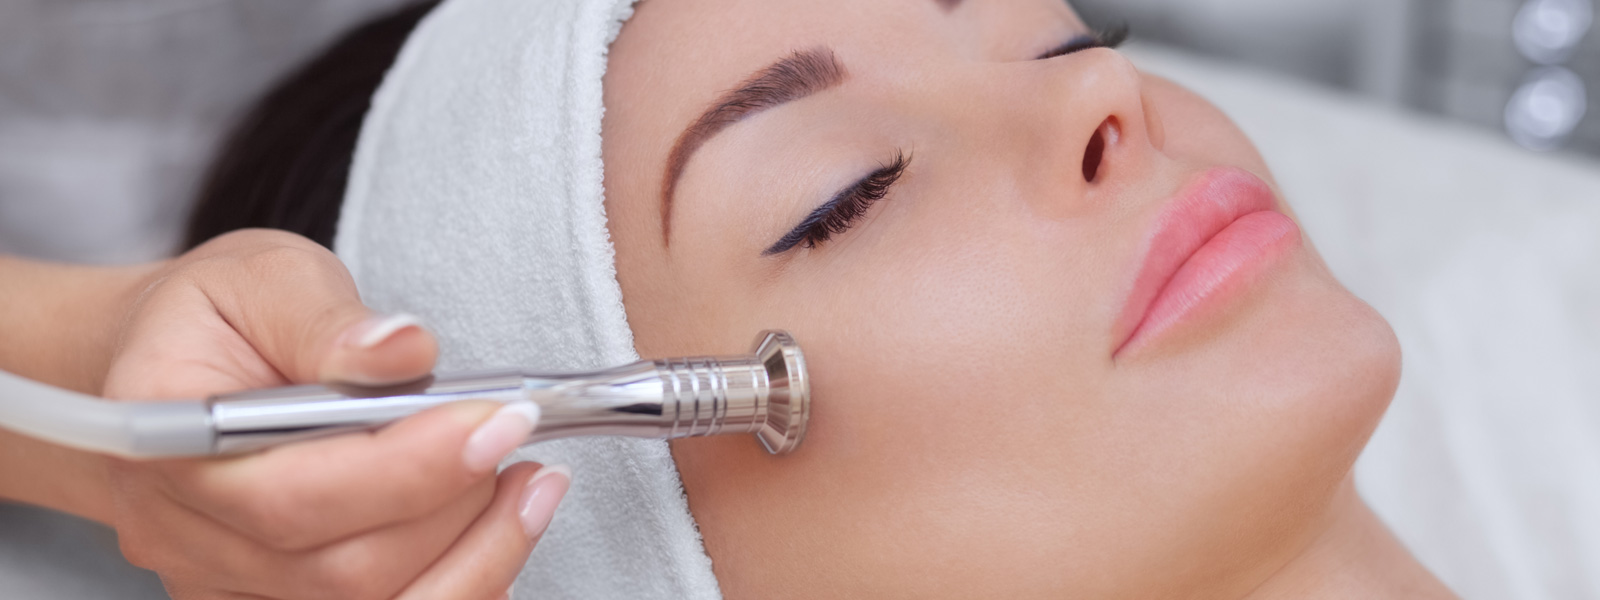 Microdermabrasion is a minimally invasive procedure used to renew overall skin tone and texture.